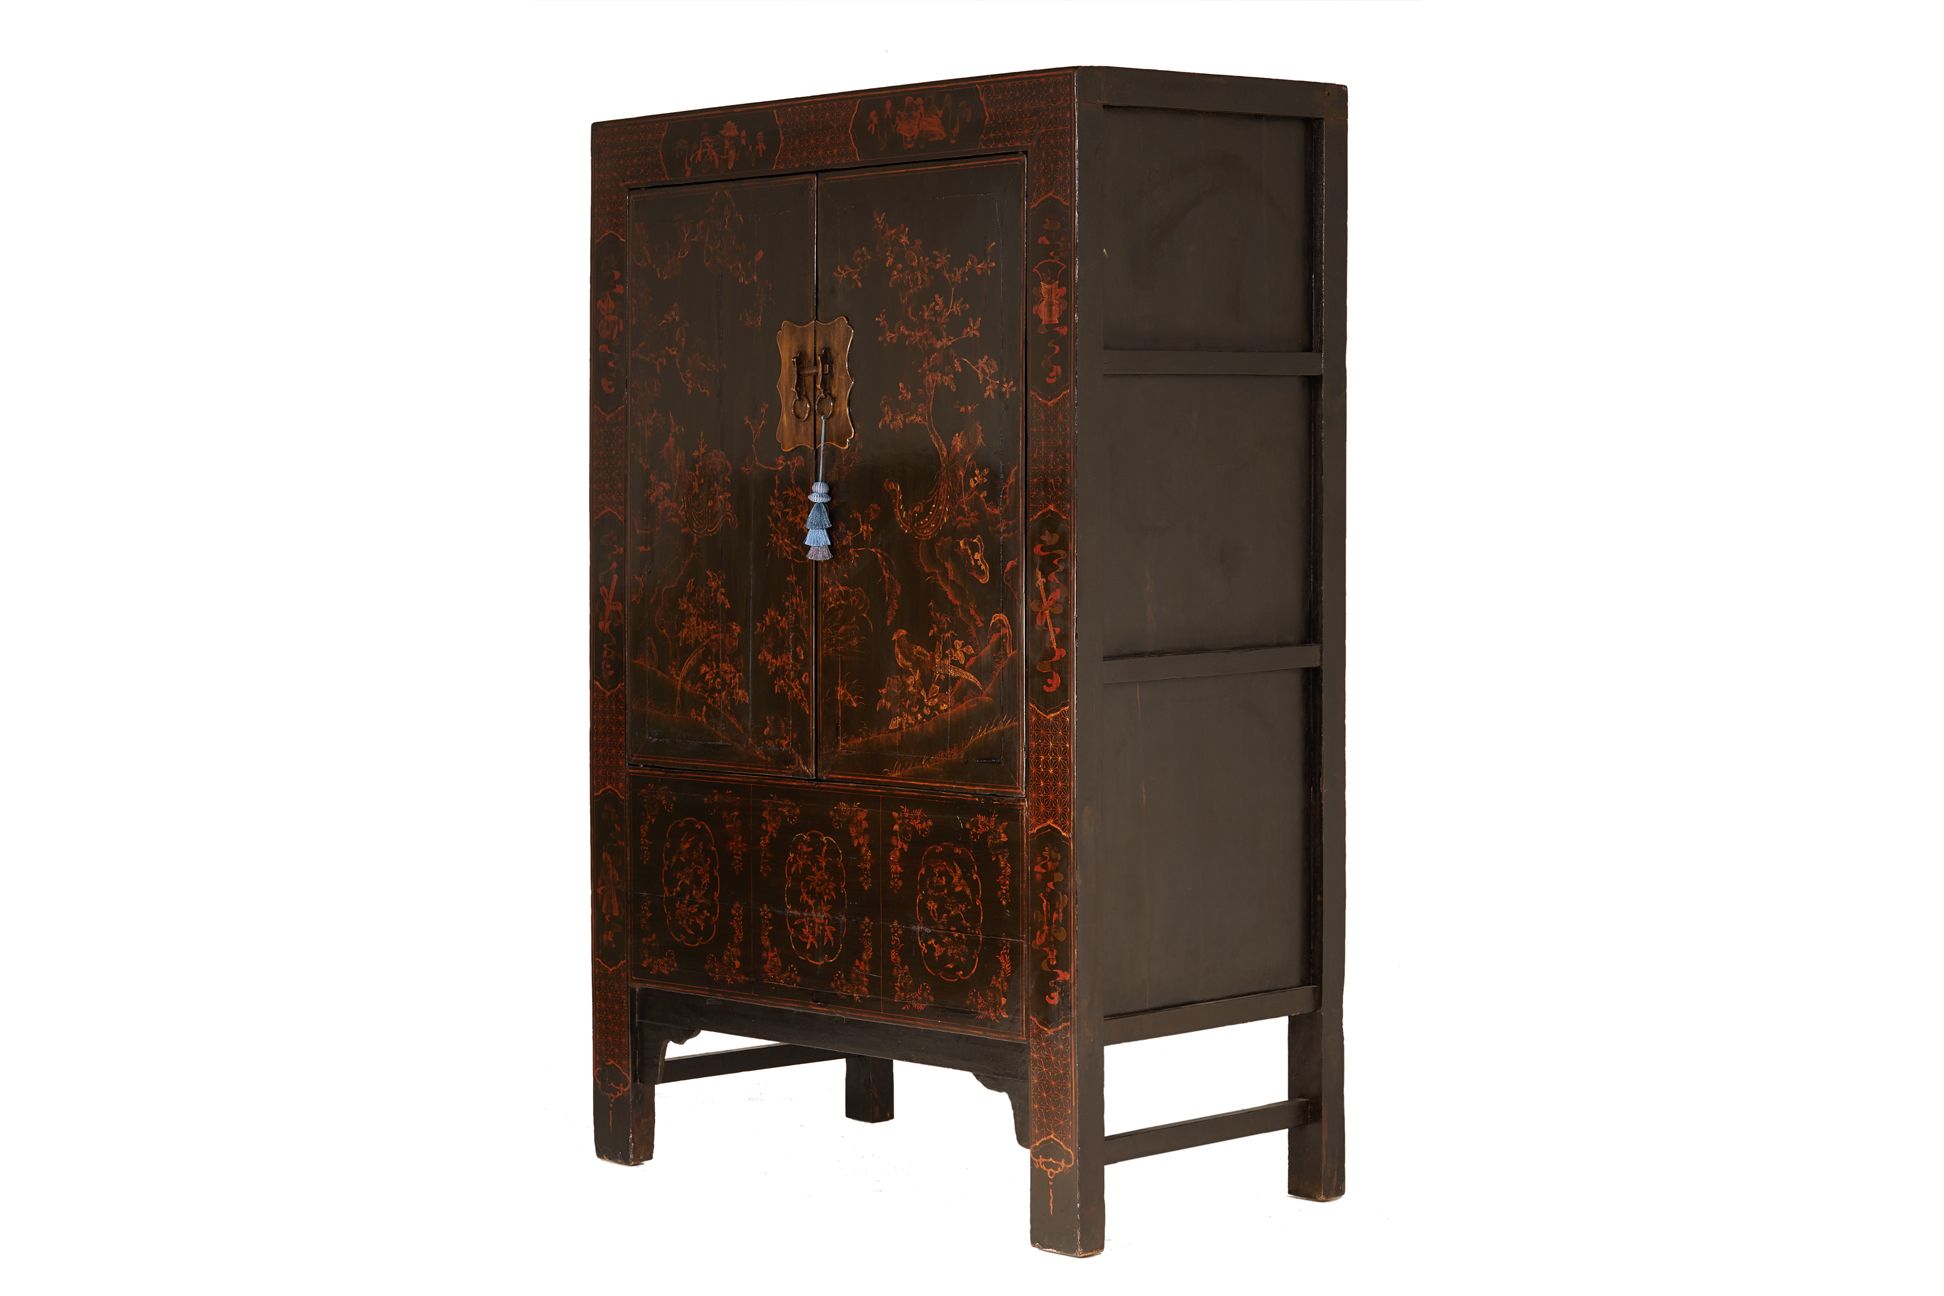 AN ANTIQUE CHINESE BLACK LACQUERED CABINET